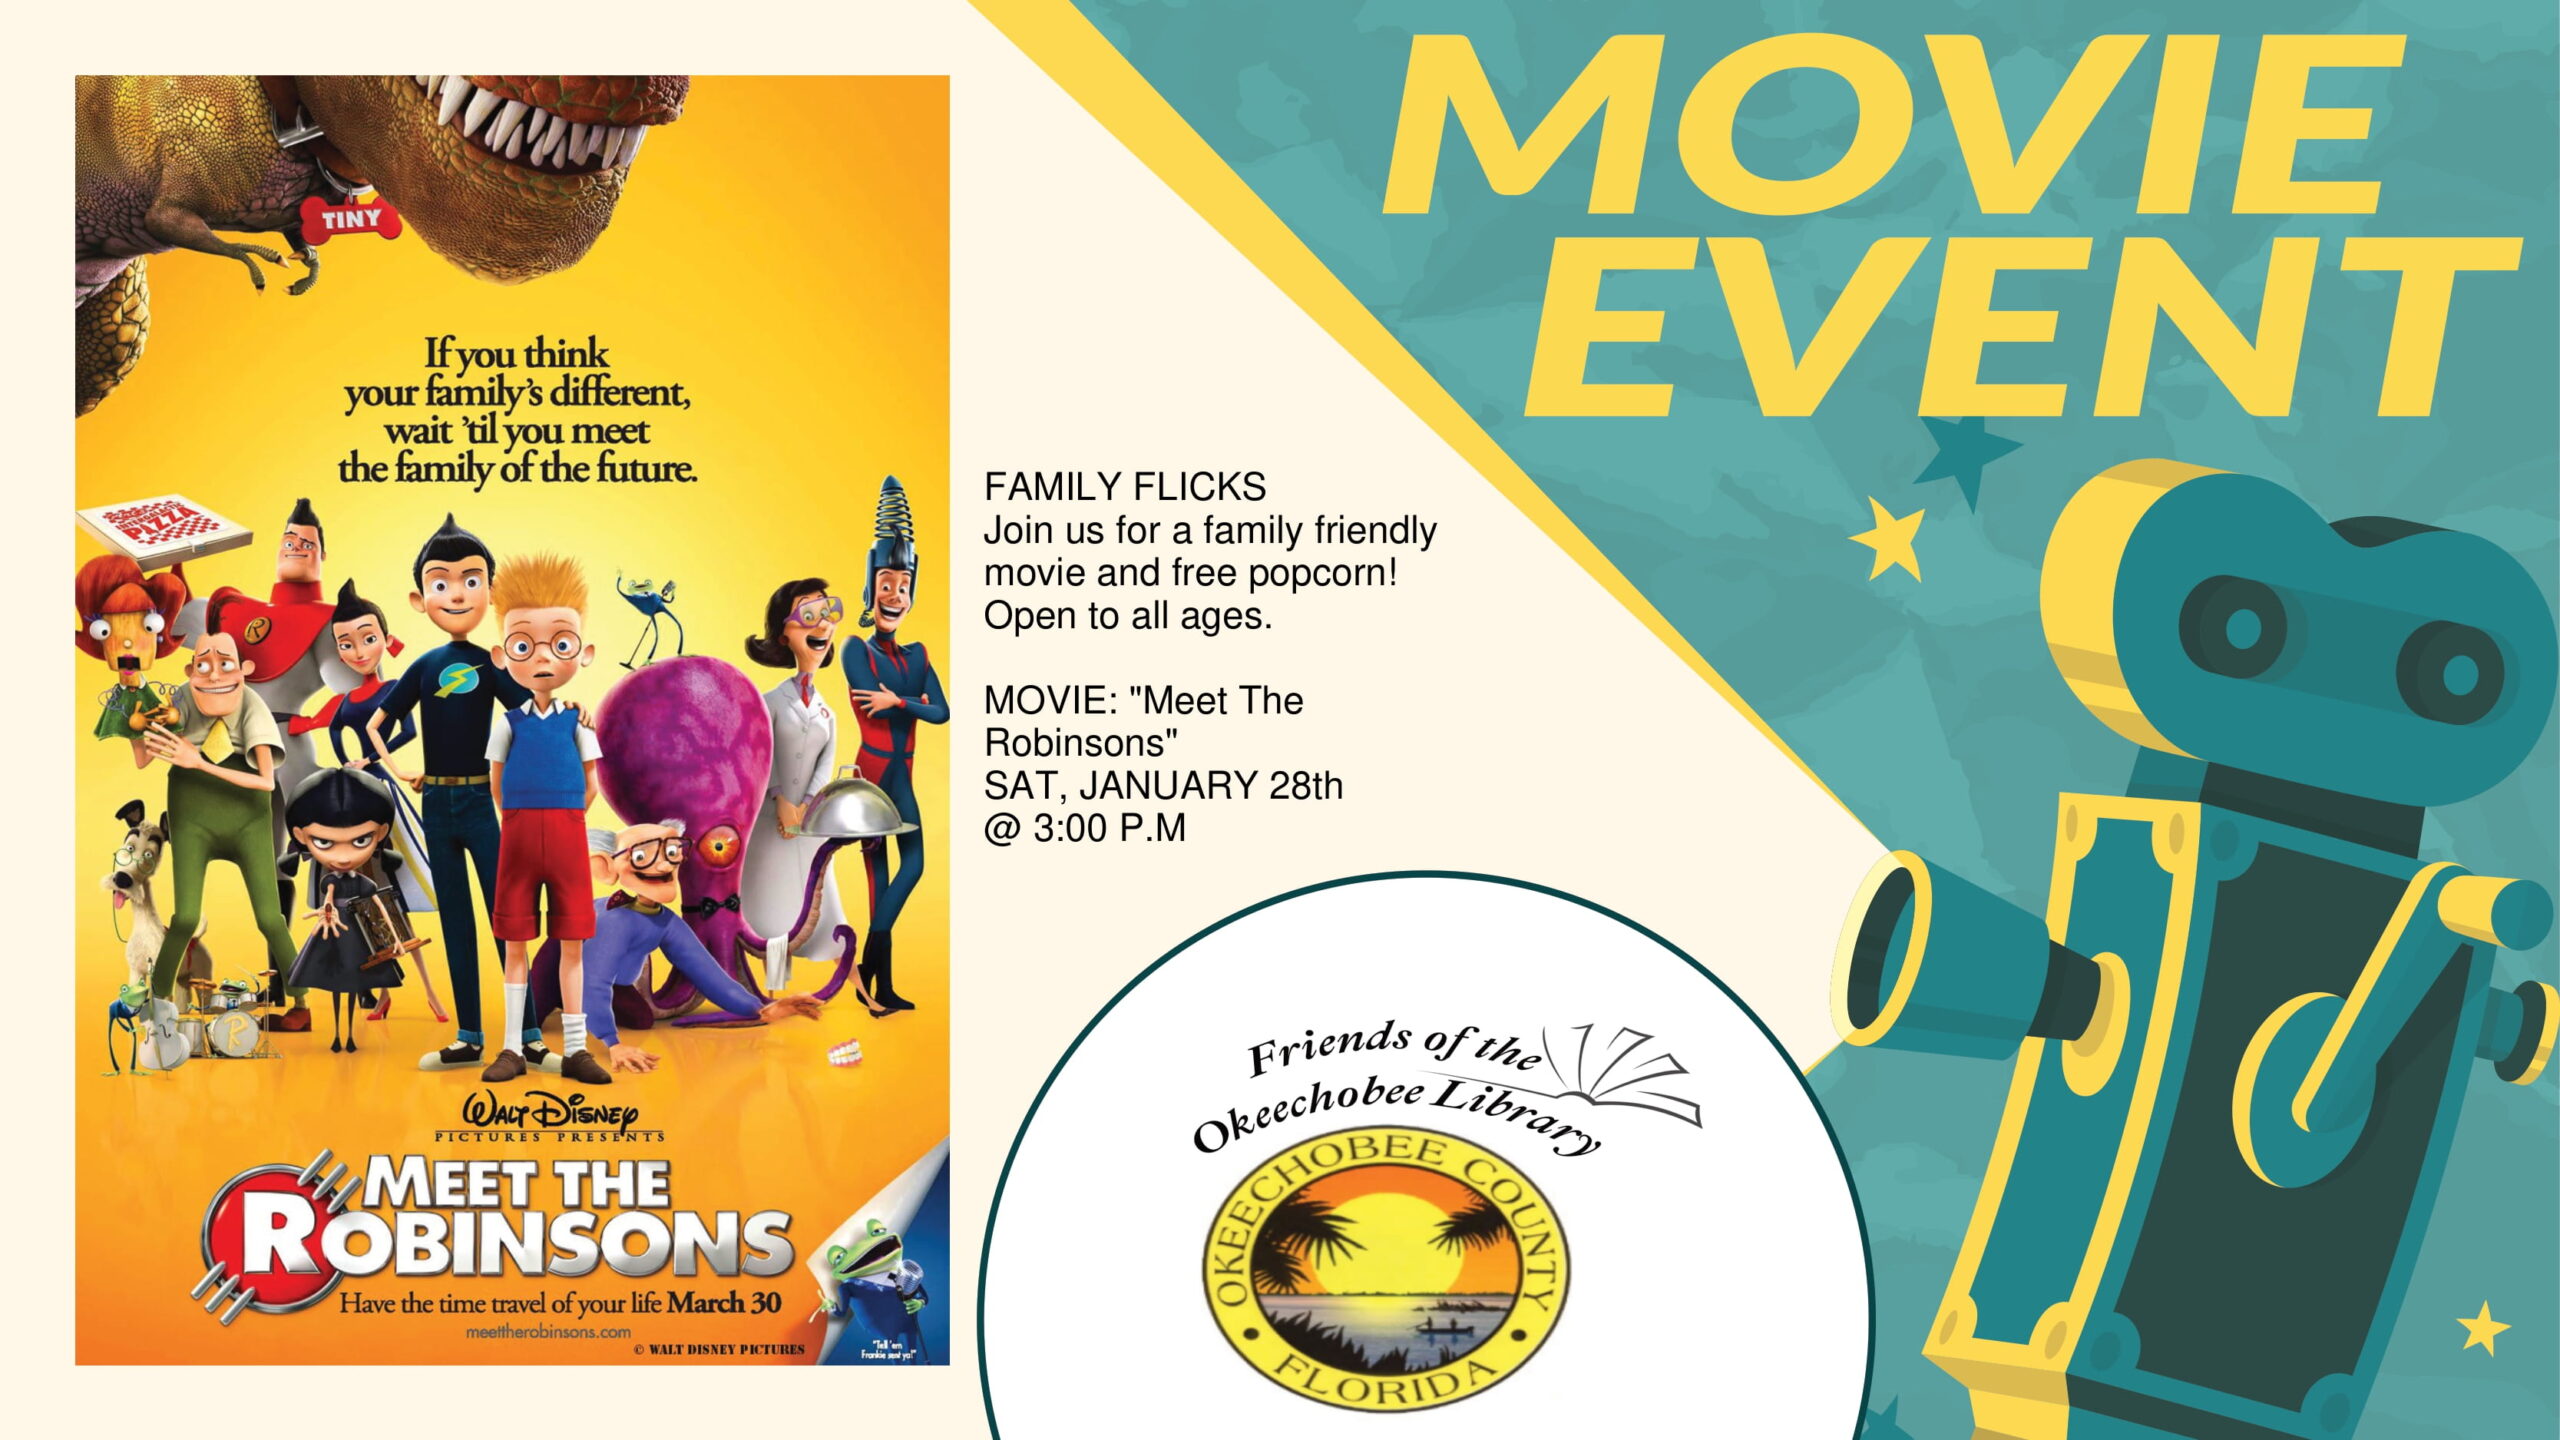 "Join us for a FREE movie and a snack at the Okeechobee Library! Our Family Flicks movie event featuring "Meet The Robinsons" will be held on Saturday, January 28th @ 3:00 p.m."